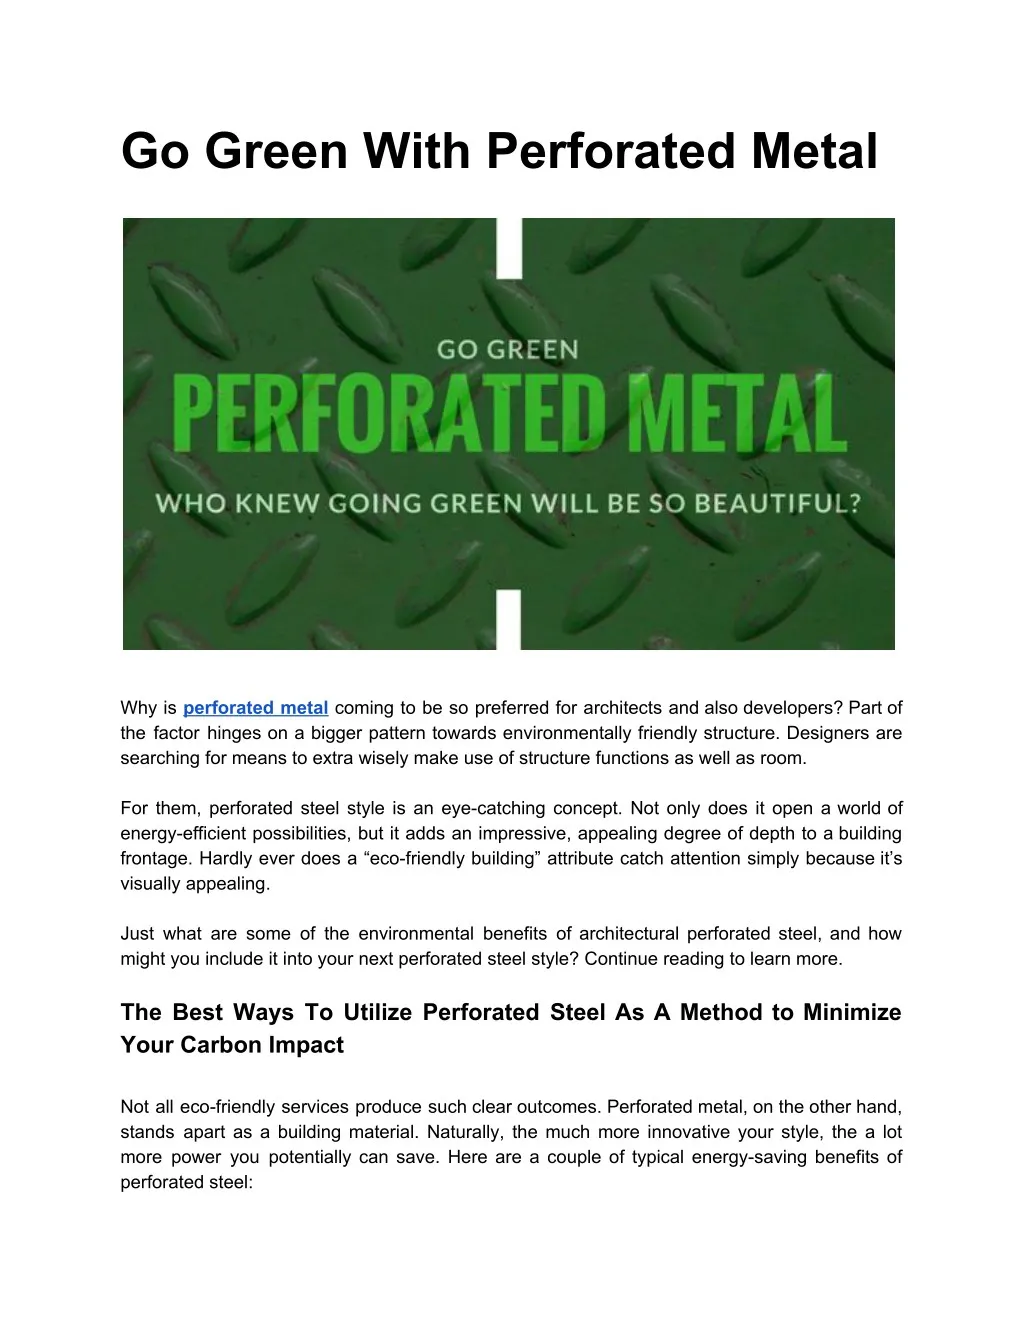 go green with perforated metal